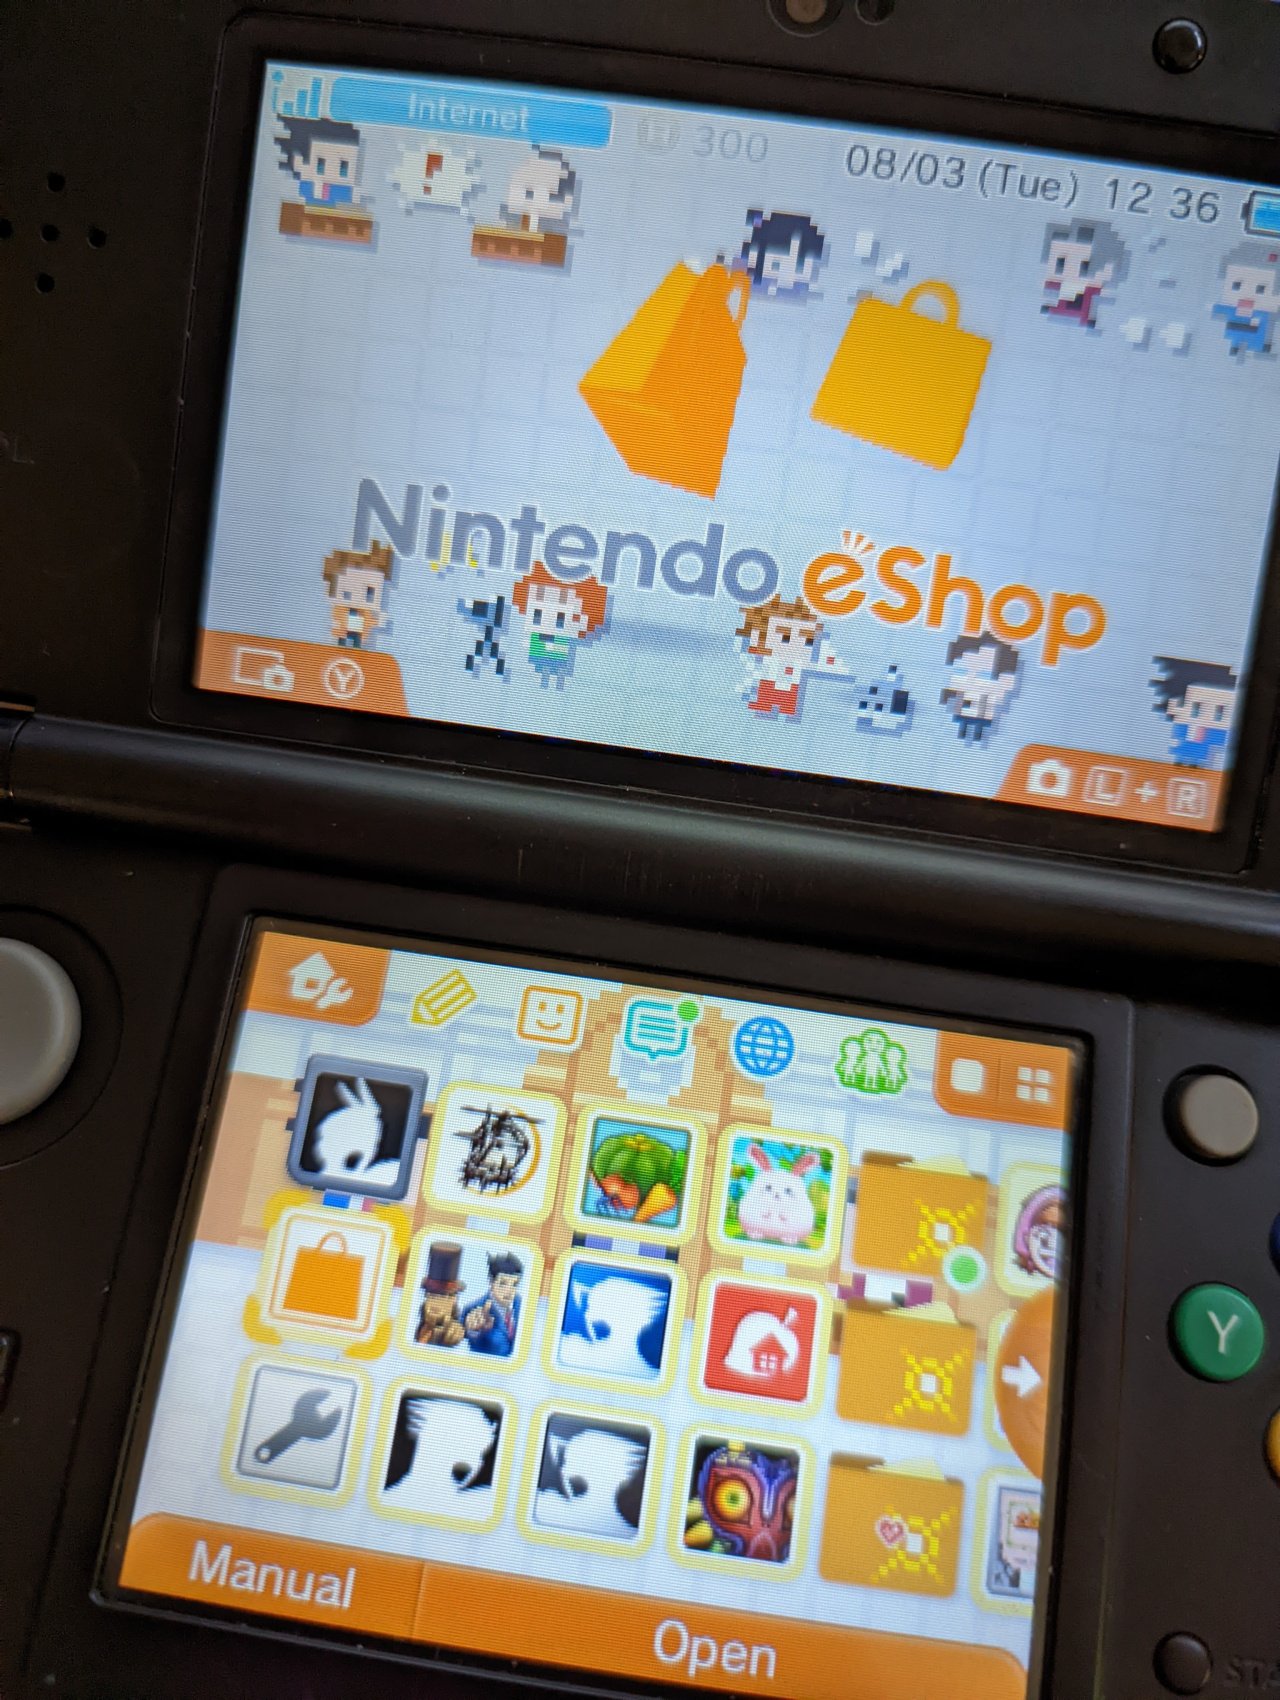 How To Redownload Games From The 3DS eShop - Downloading Digital